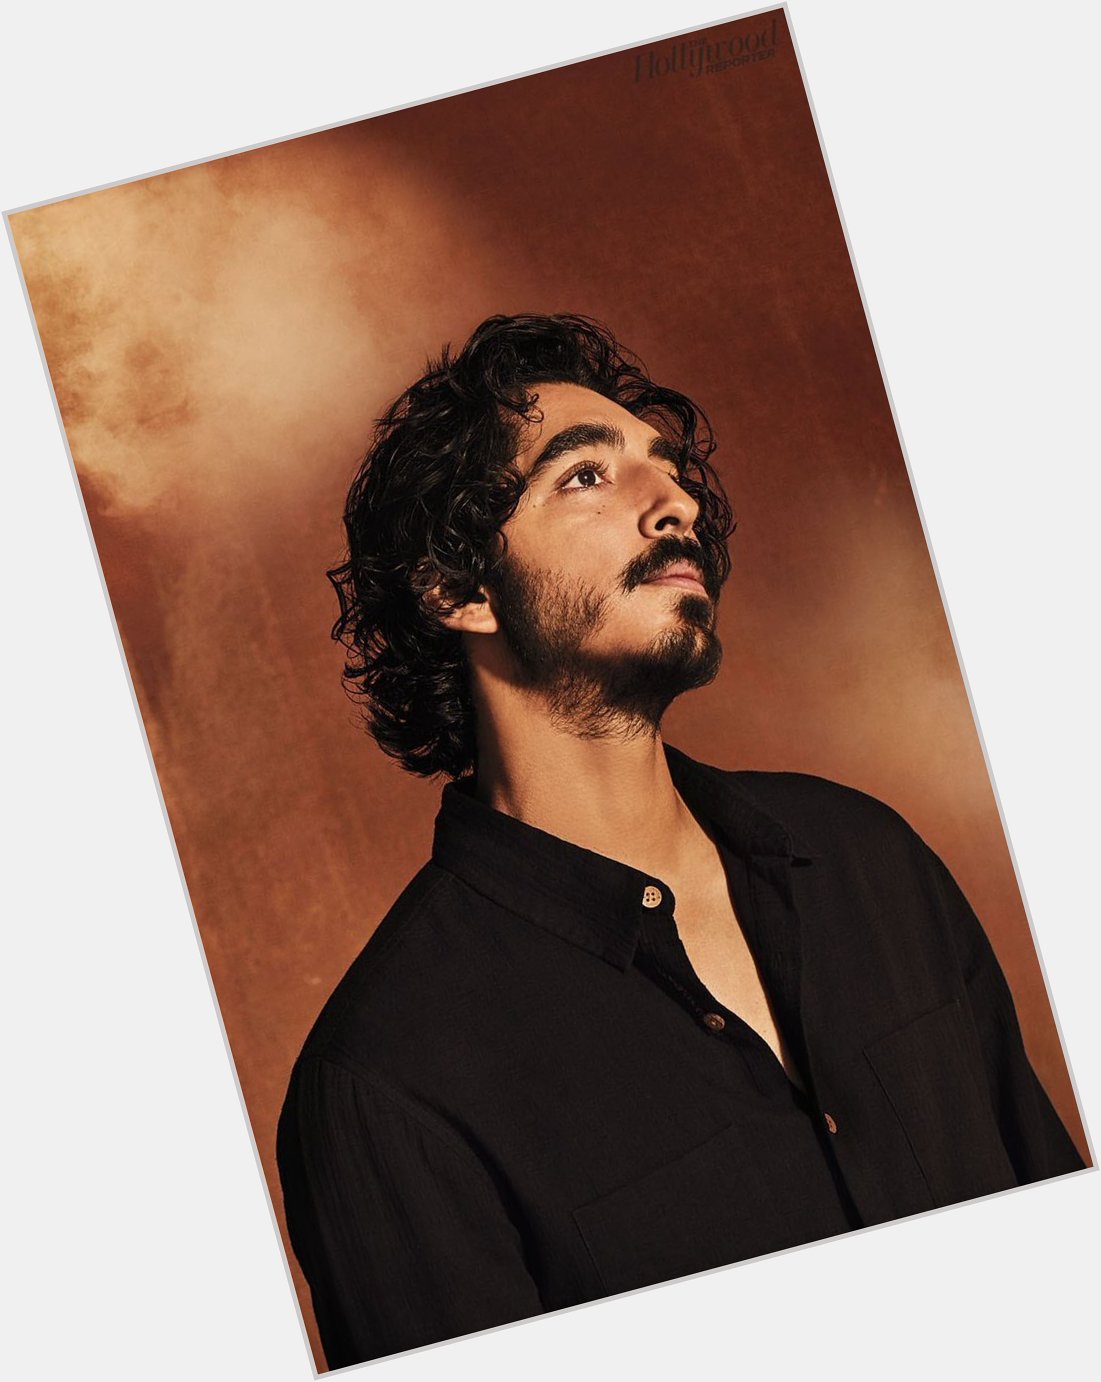 Happy Birthday to Dev Patel and his spectacular hair 